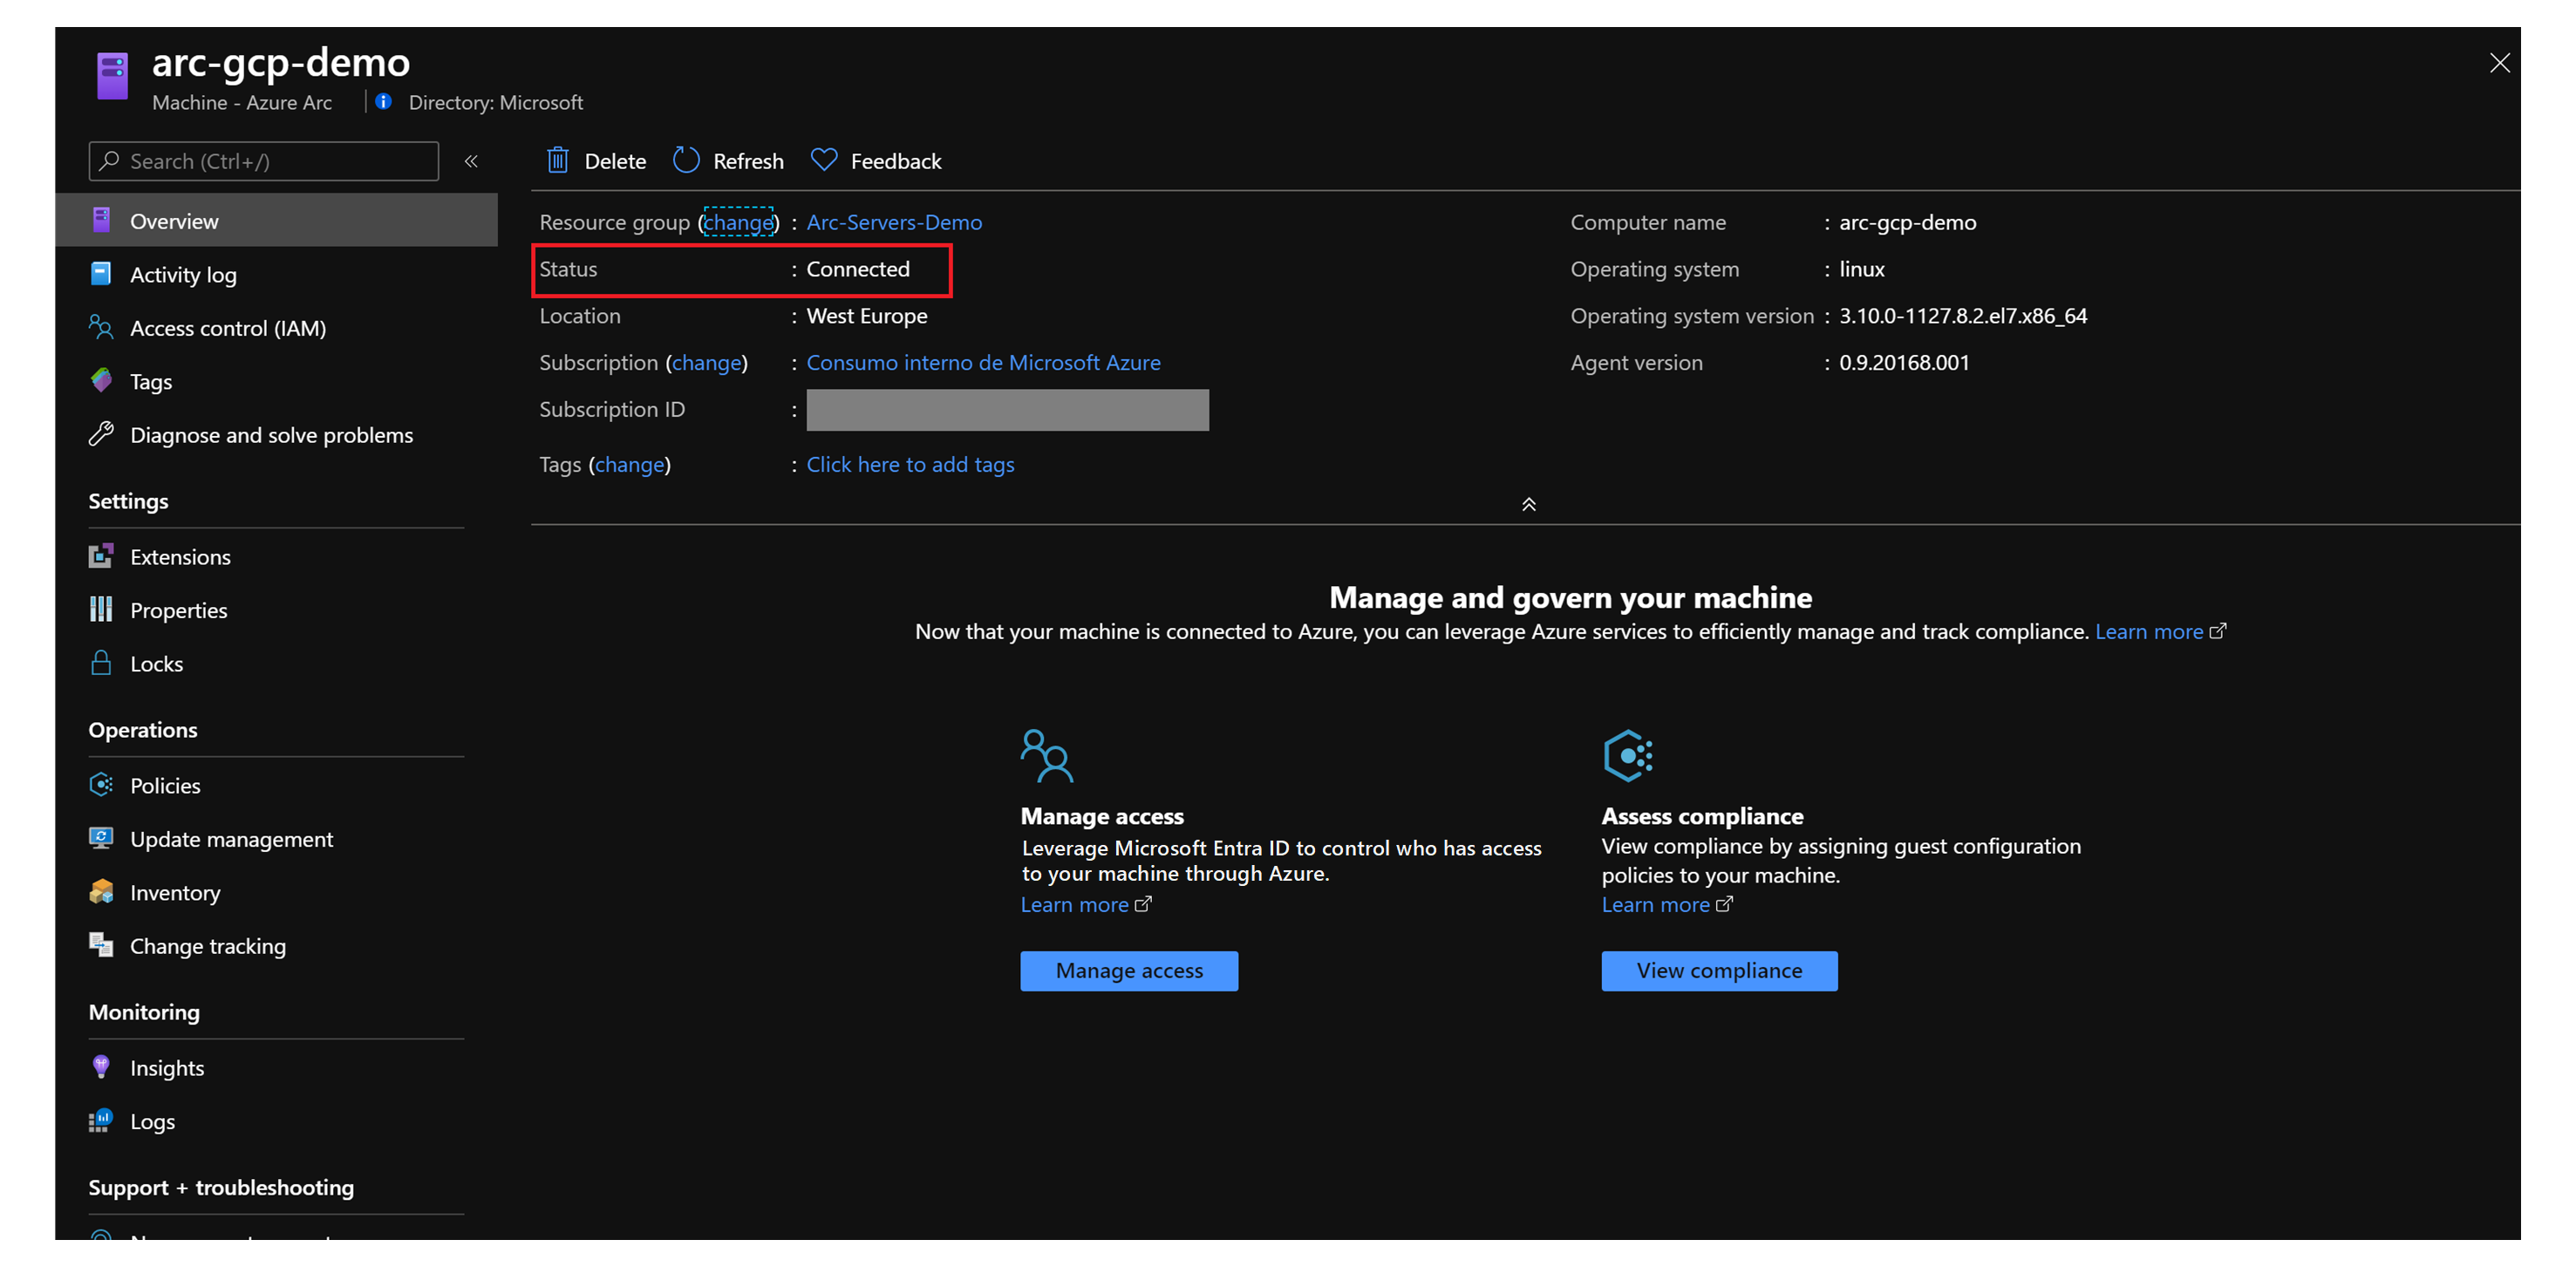 A screenshot showing the details of an Azure Arc-enabled server in the Azure portal.